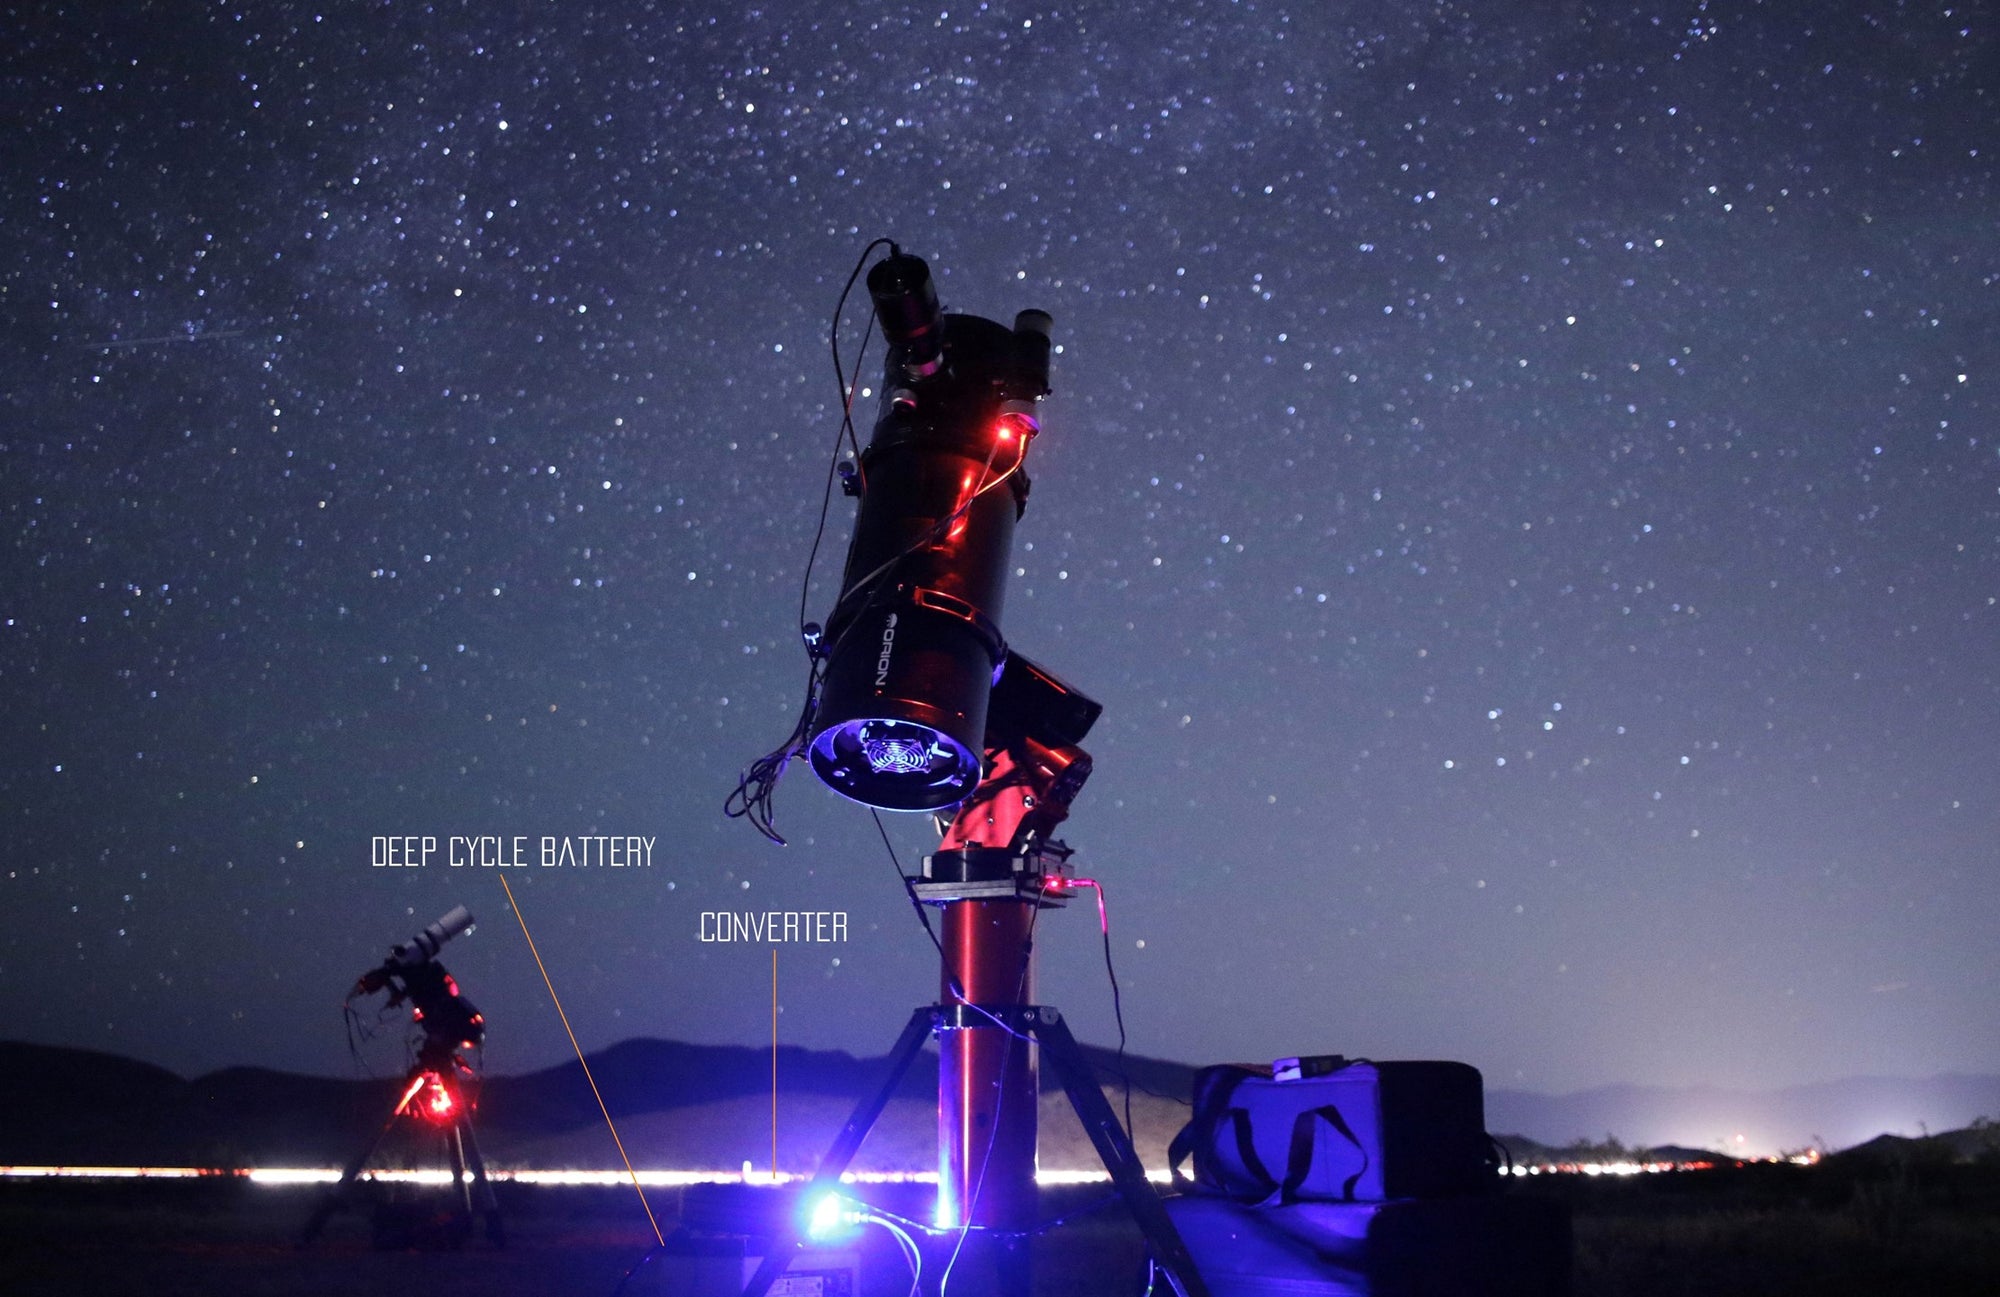 Telescope Power for Astrophotography - at Home & On the Go